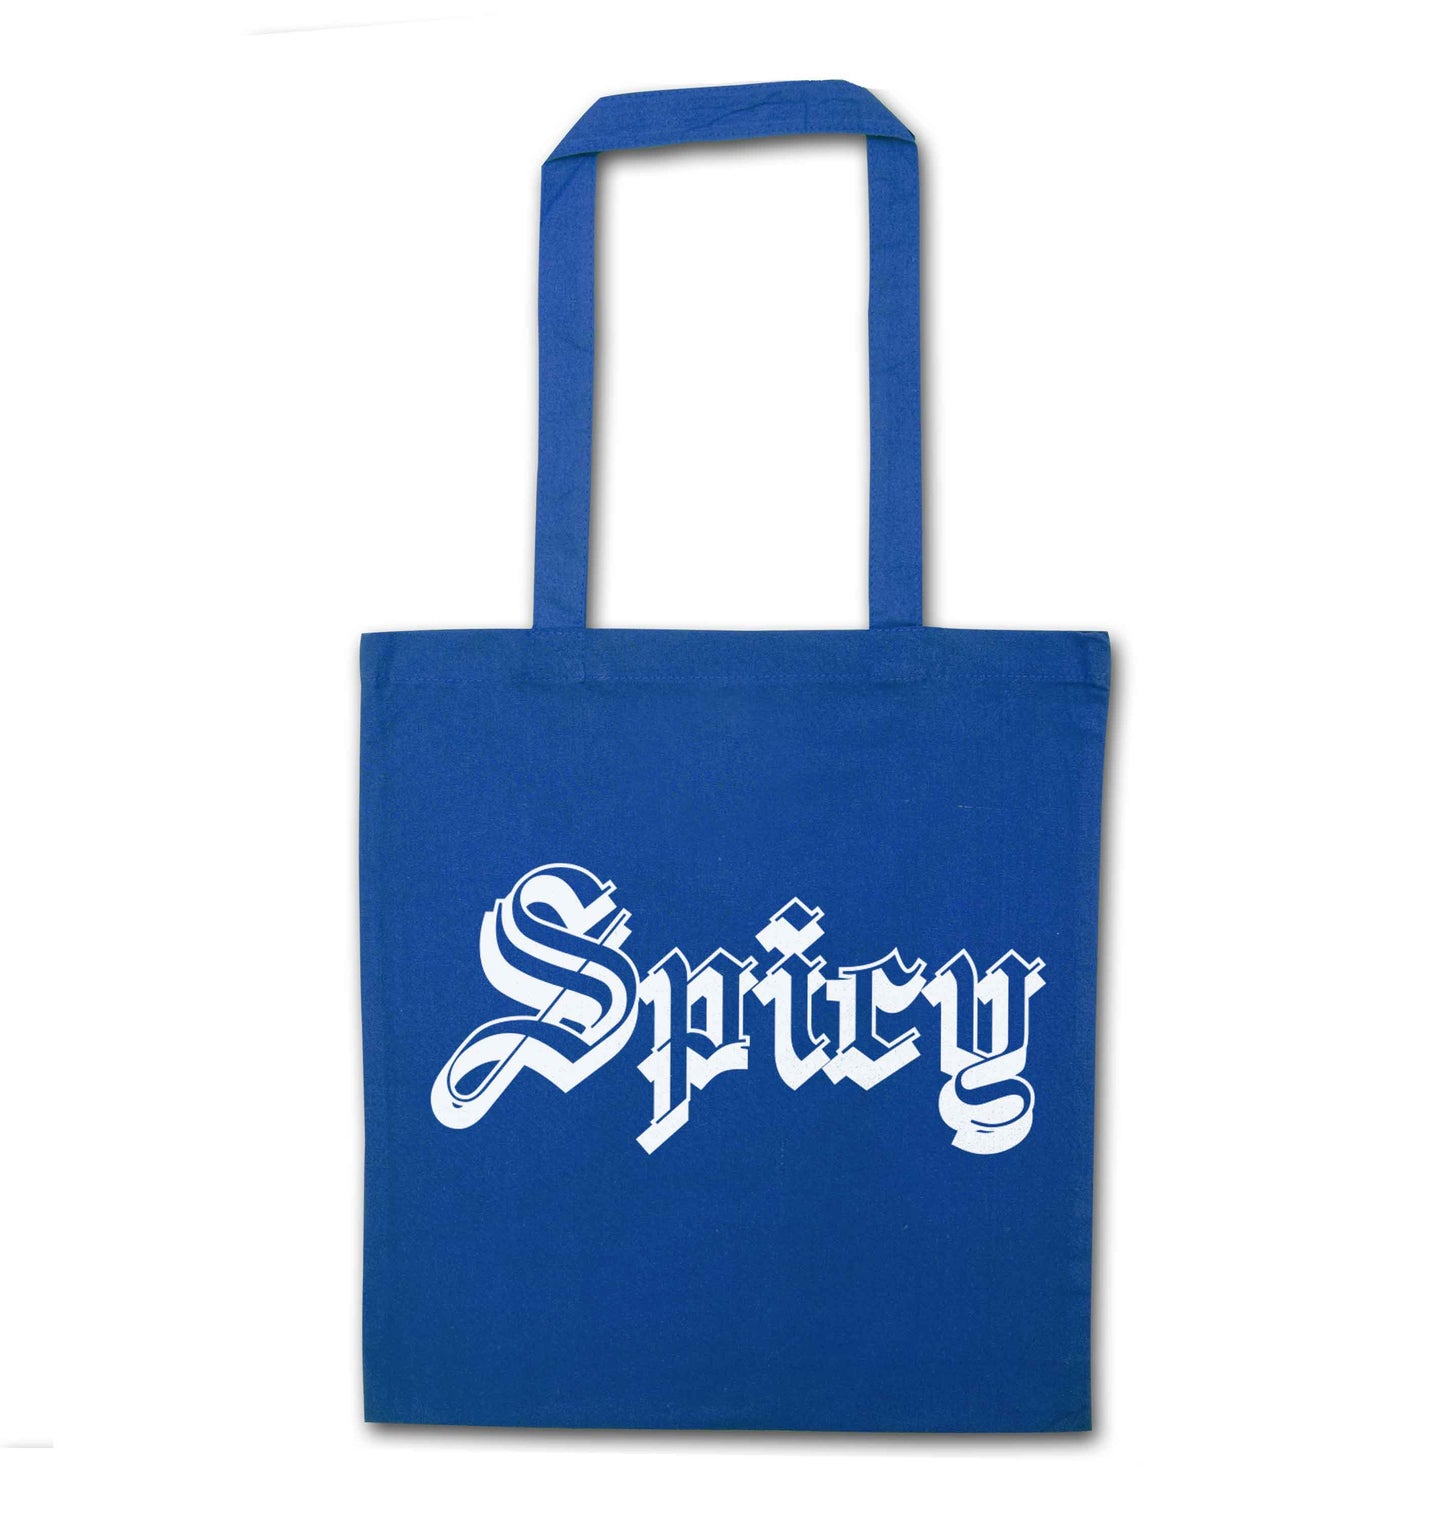 Spicy blue tote bag